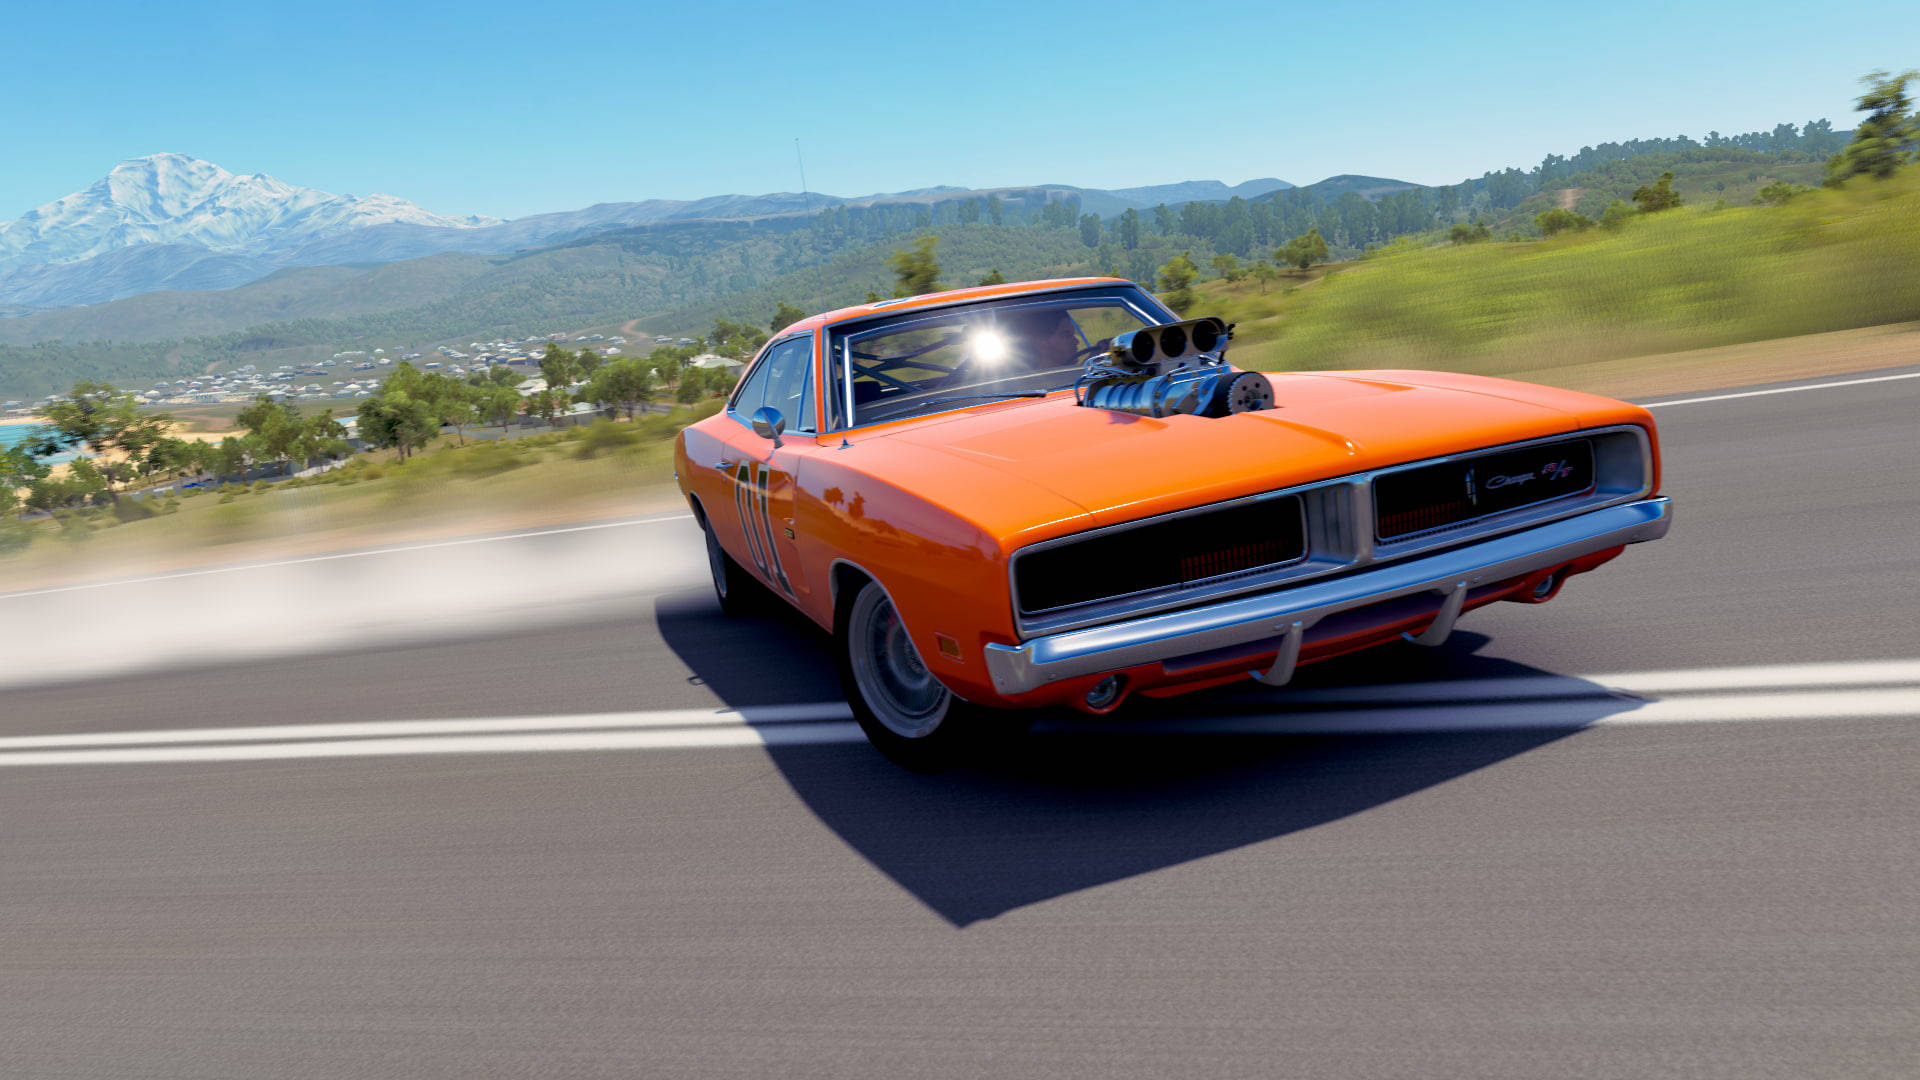 Classic Elegance - 1969 Dodge Charger on the Road Wallpaper